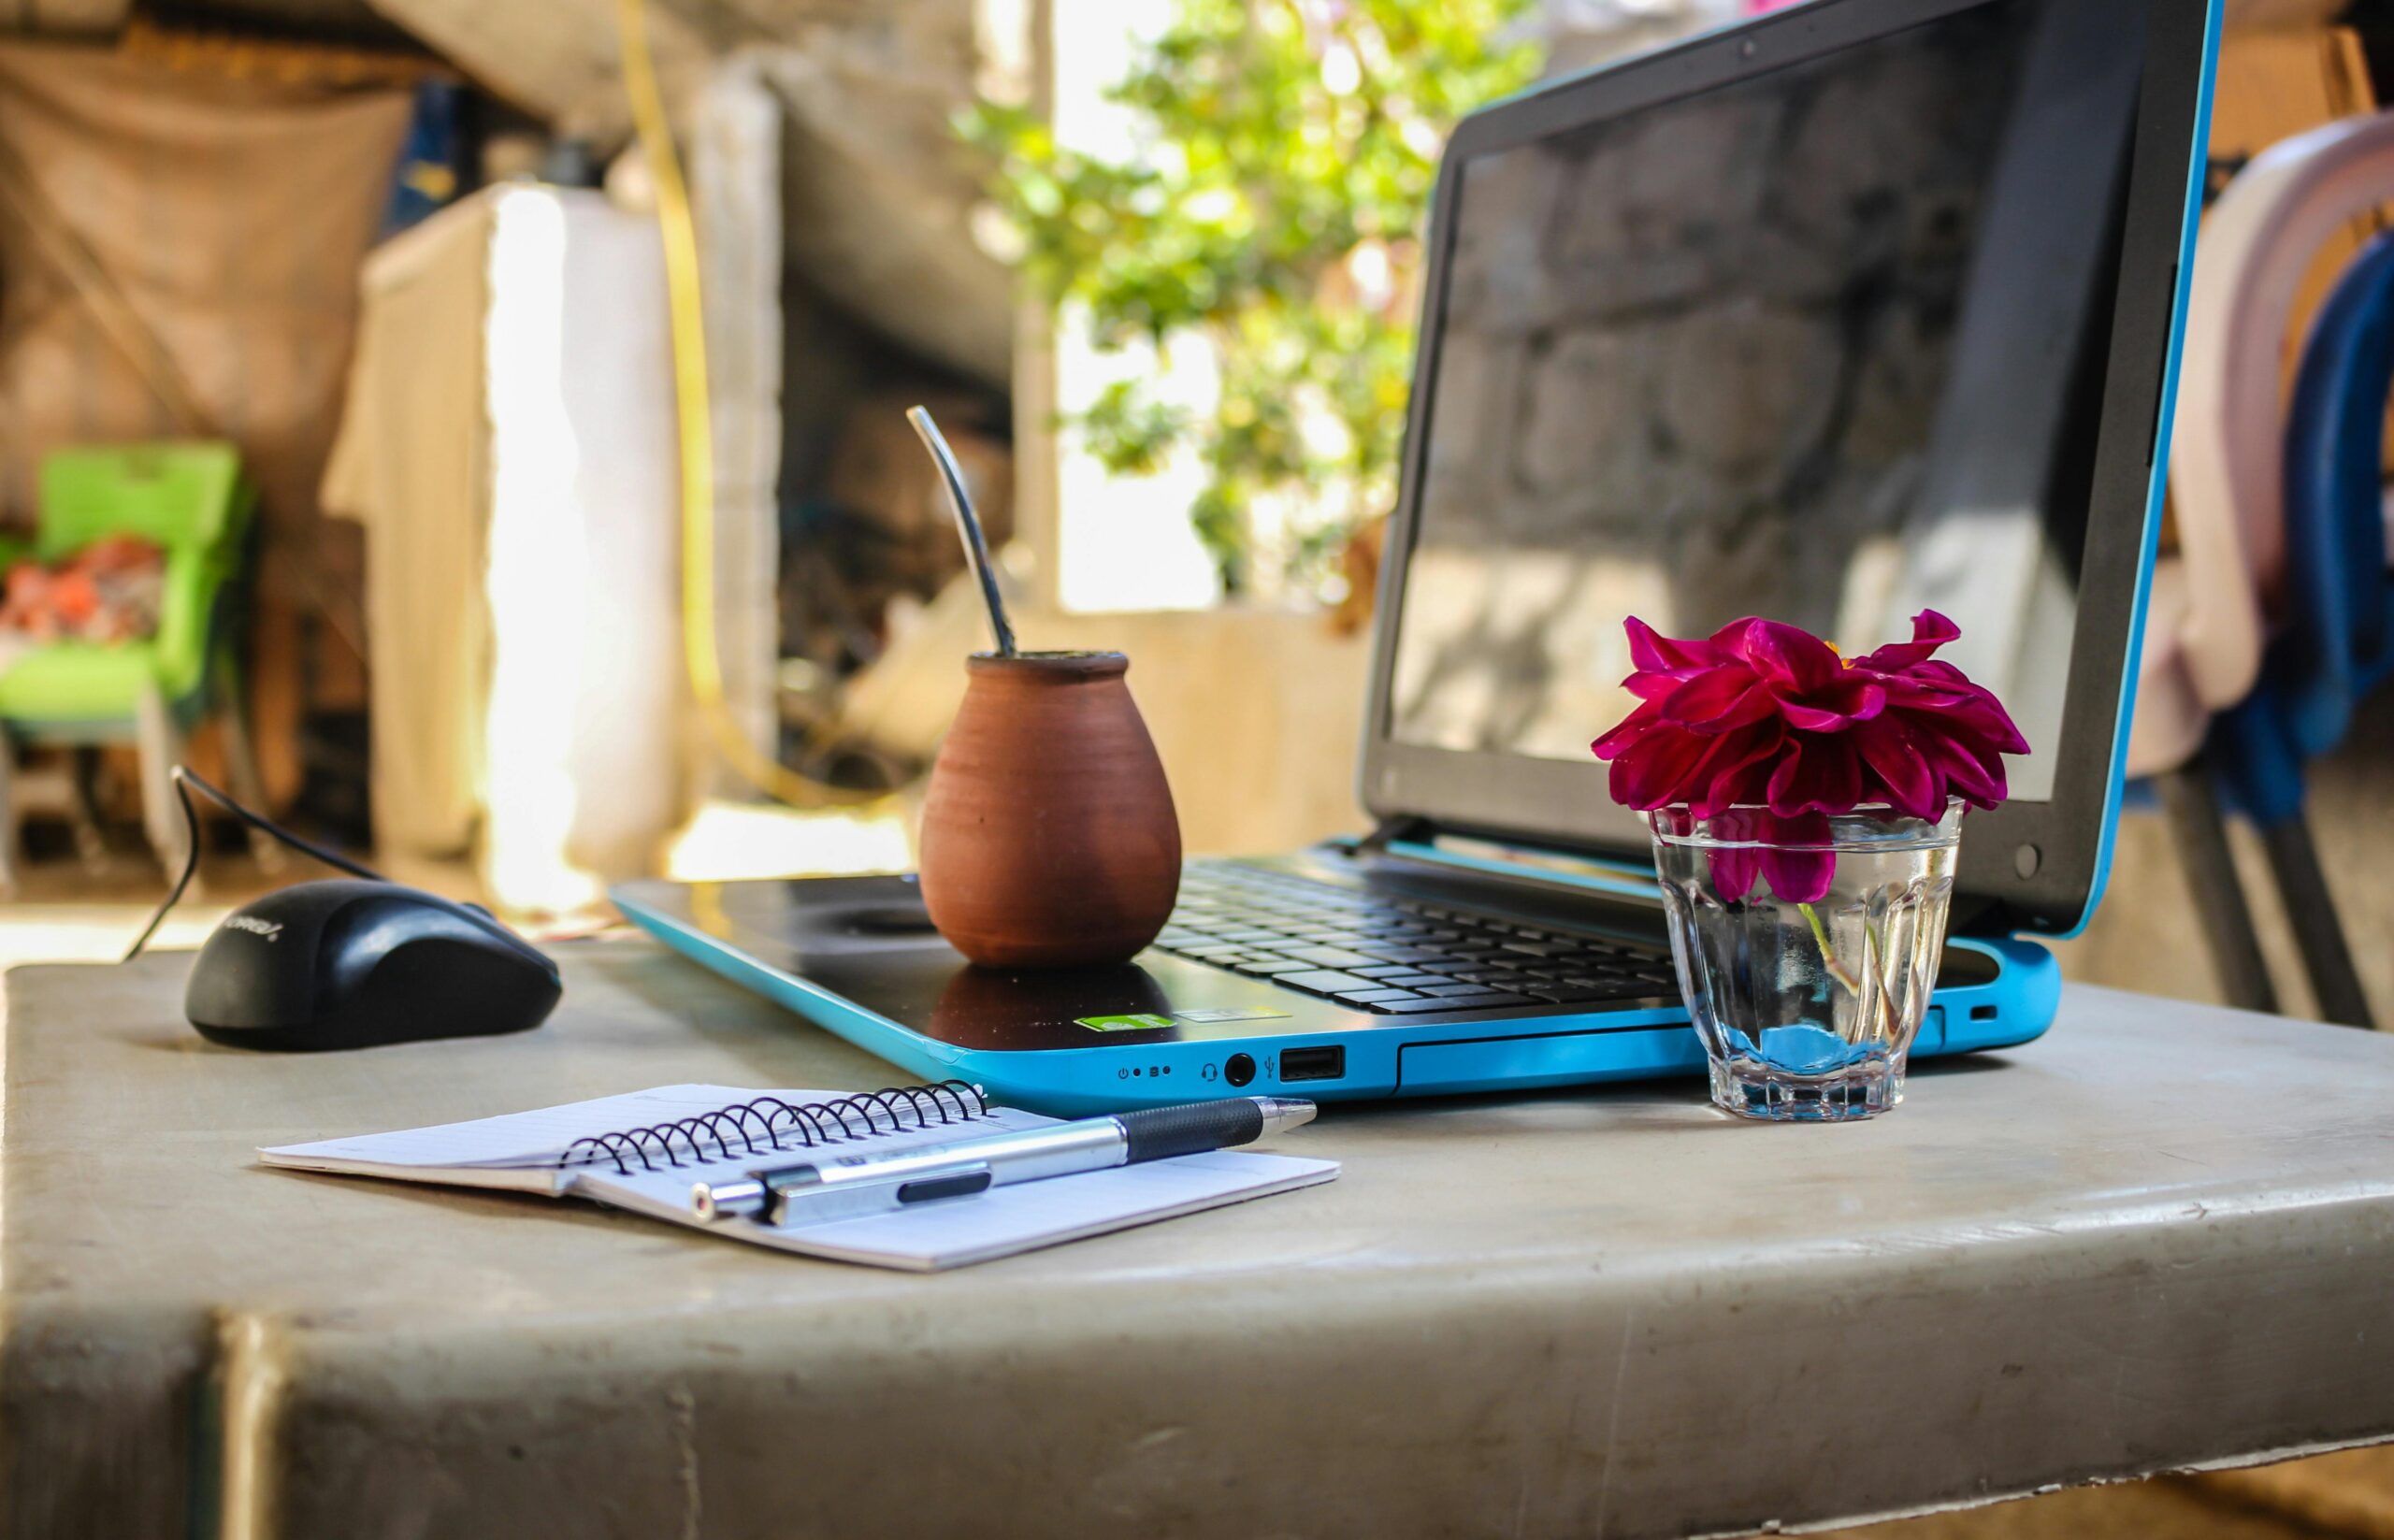 A laptop in a tropical location - a digital nomad